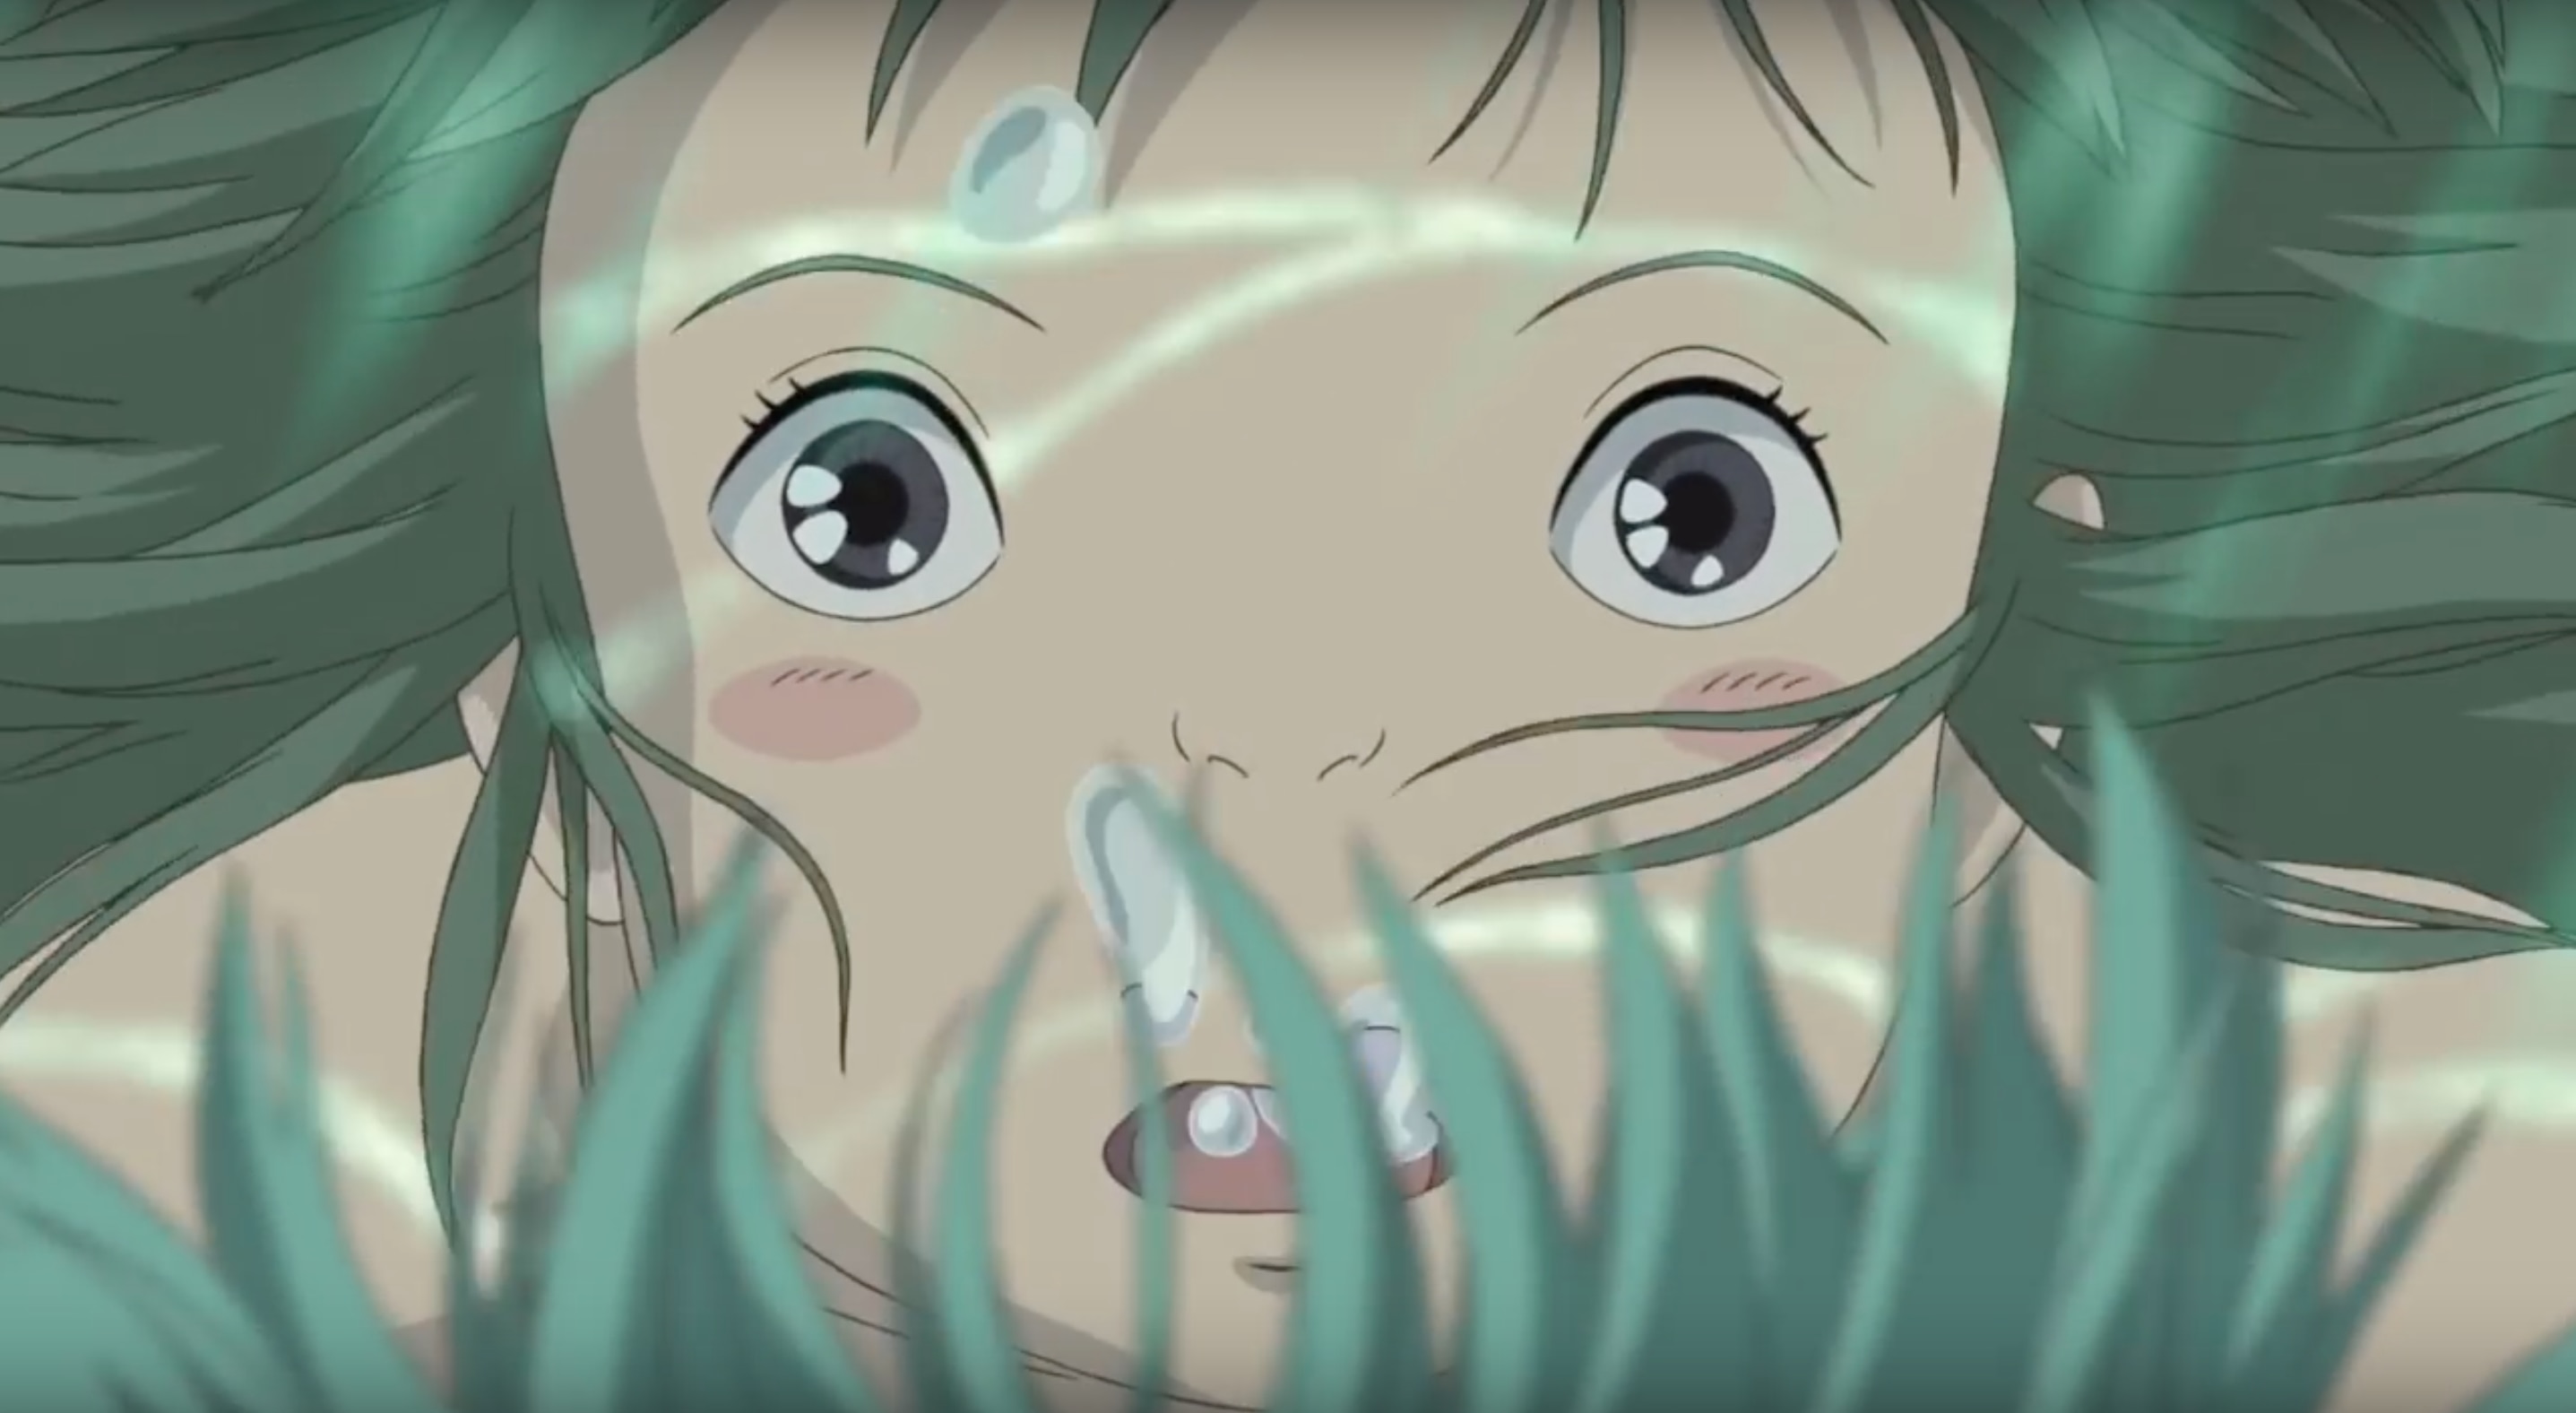 Studio Ghibli characters influenced by Japanese folklore | SYFY WIRE